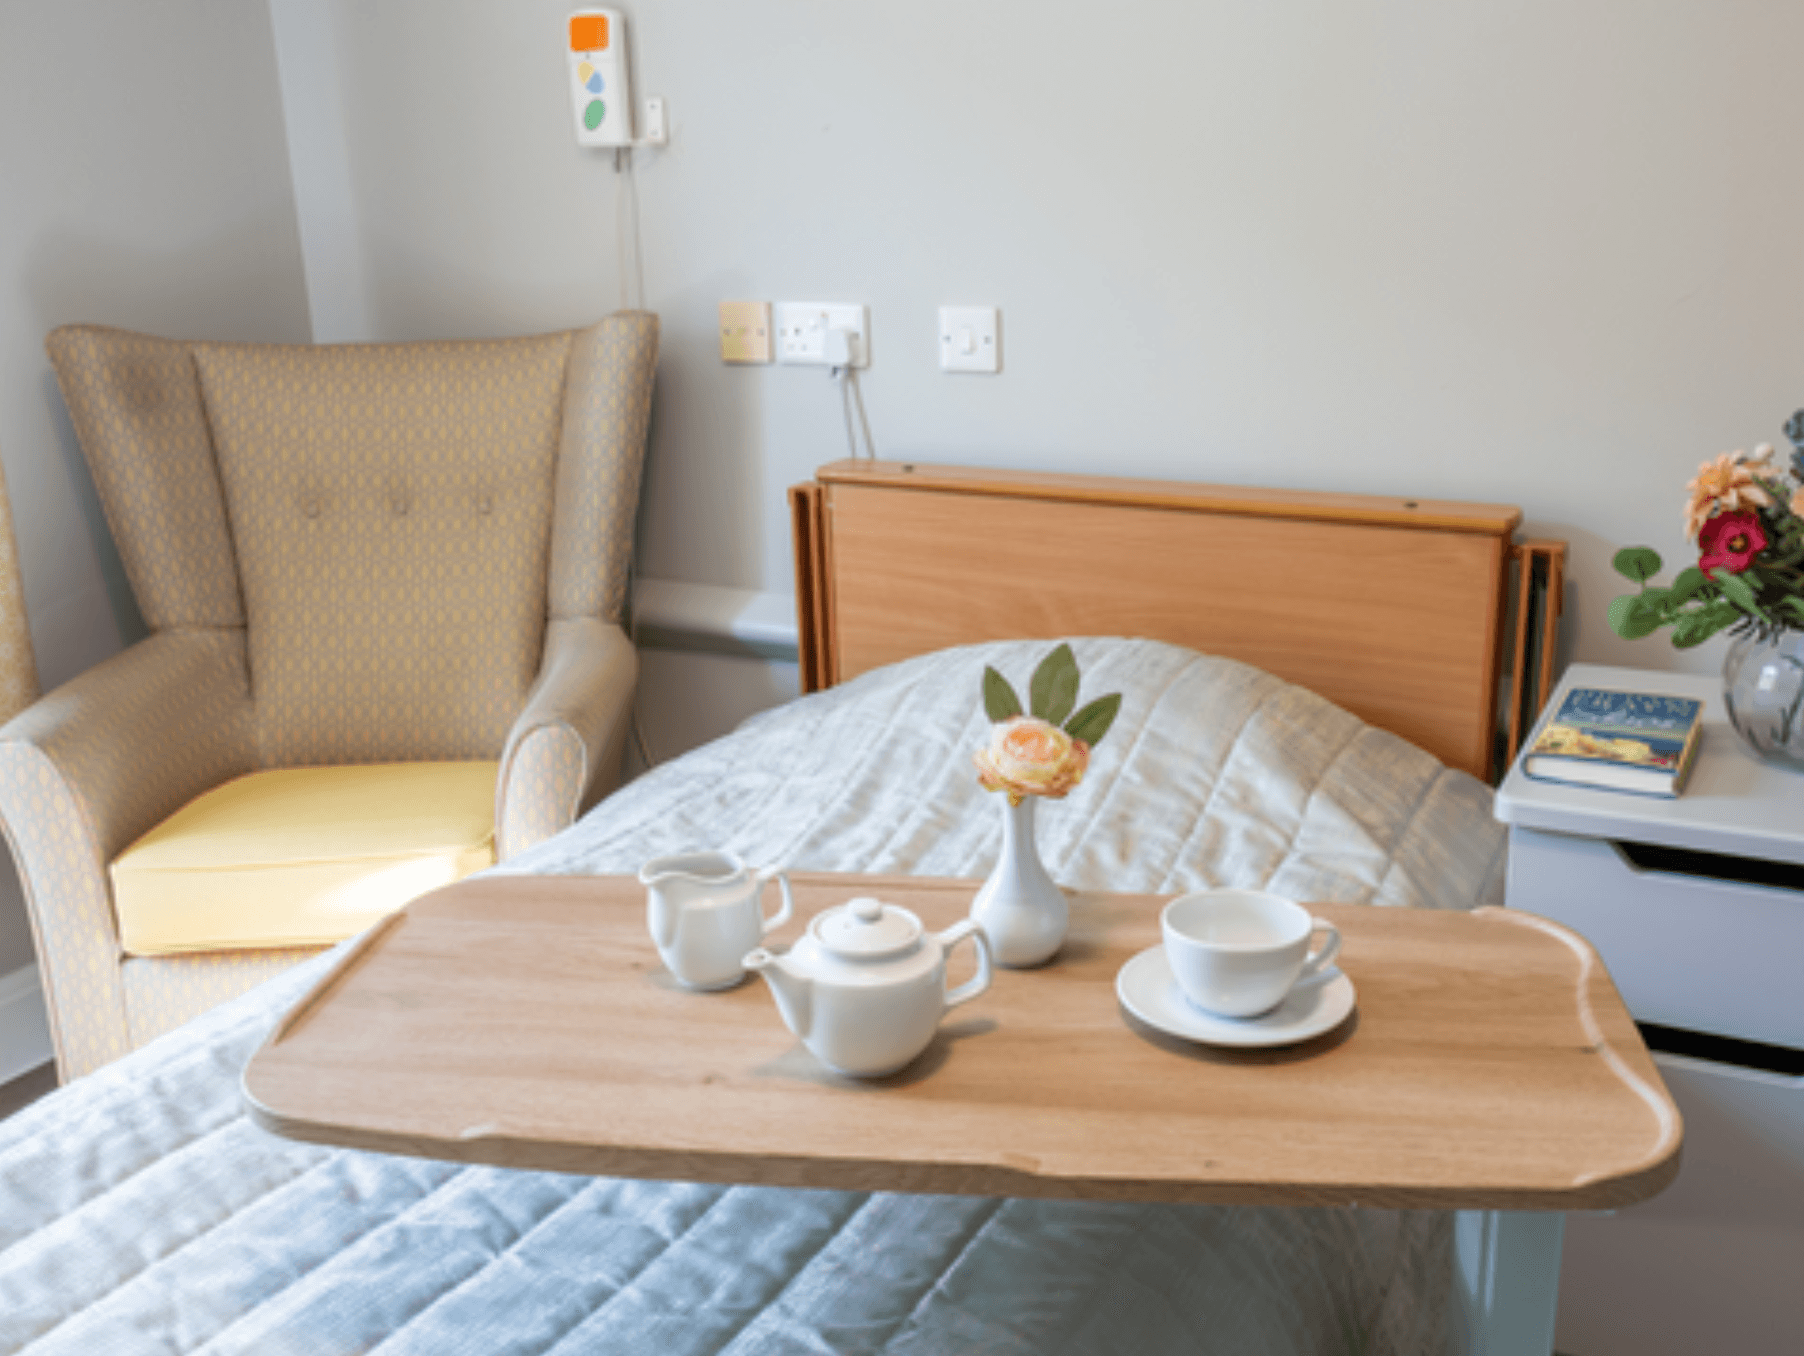 Bedroom of Haverlock Court care home in Stockwell, London